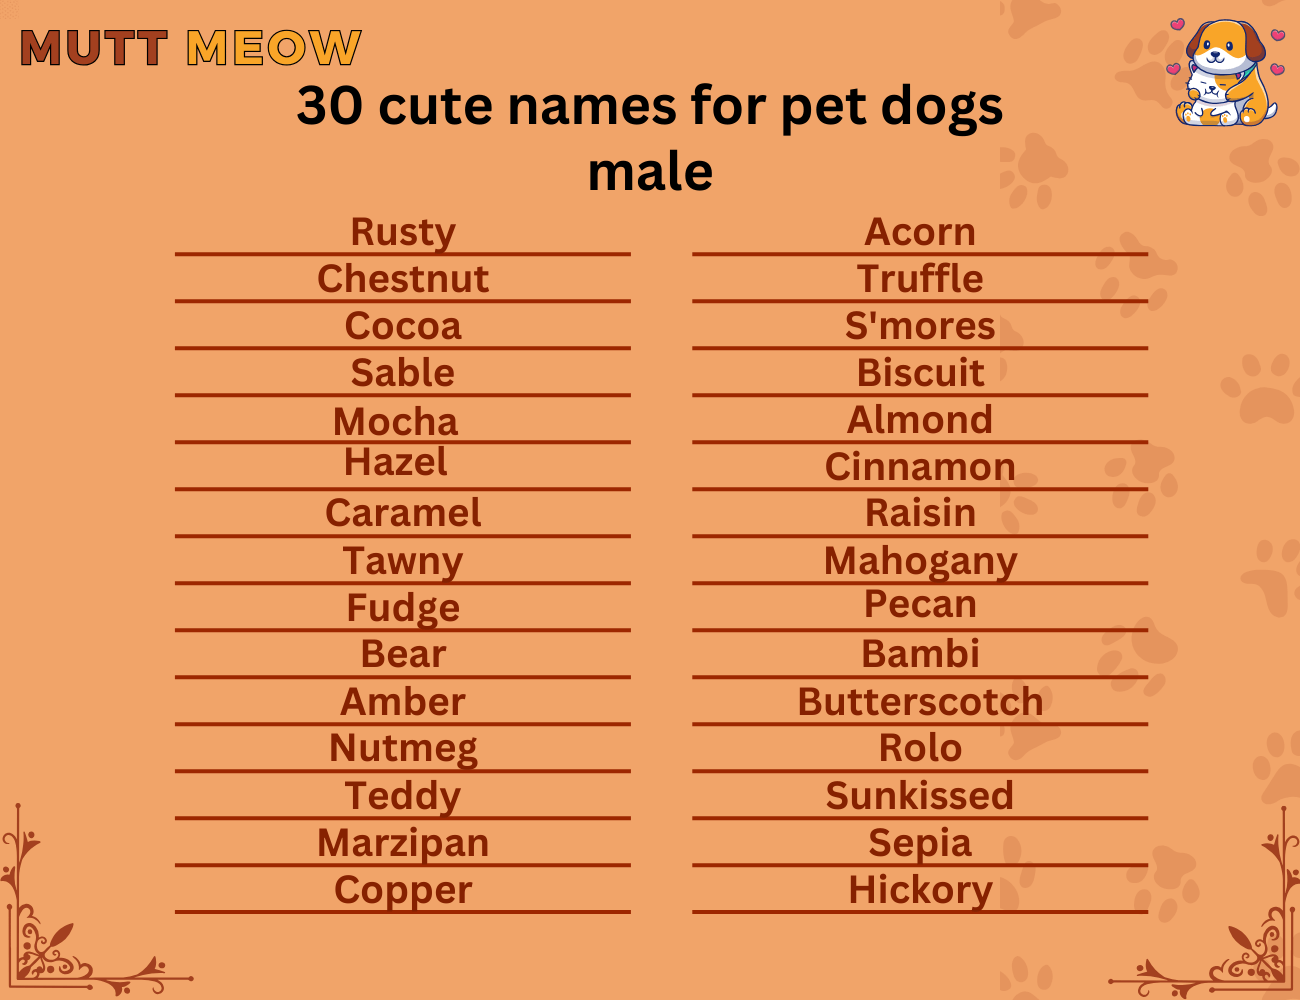 30 cute names for pet dogs male